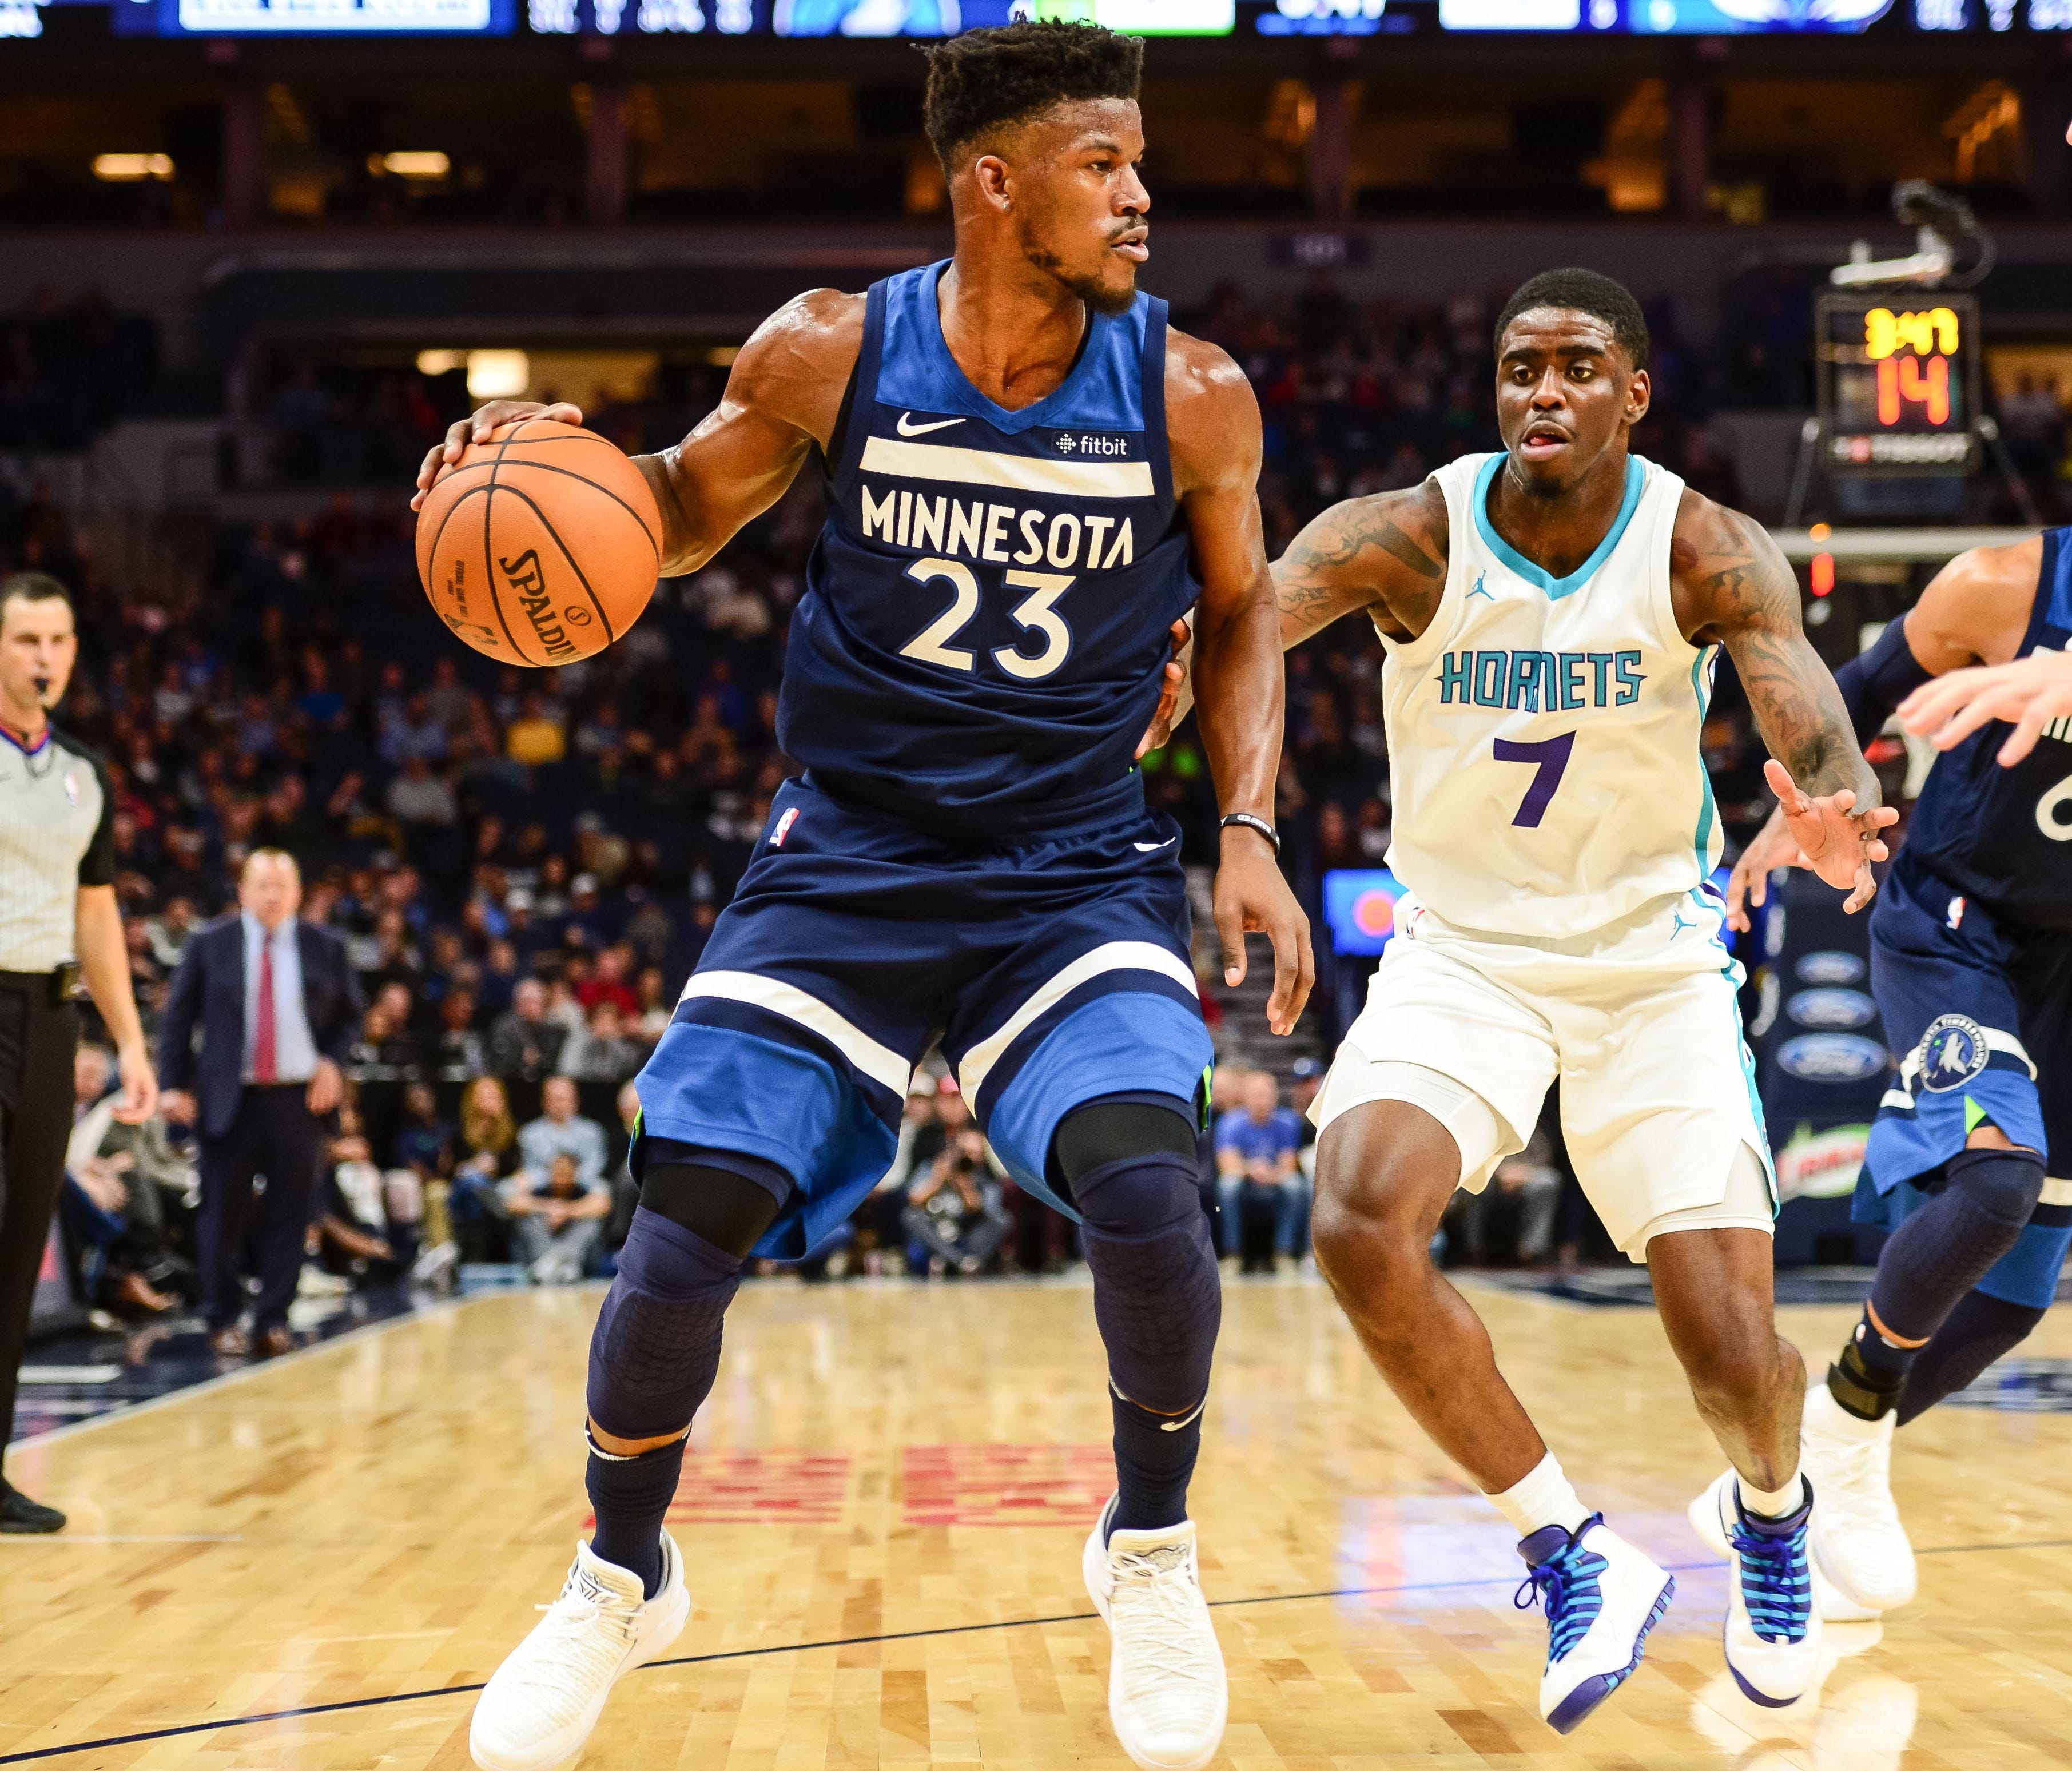 Minnesota Timberwolves guard Jimmy Butler (23) controls the ball while defended by Charlotte Hornets forward Dwayne Bacon (7) during the third quarter at Target Center. The Timberwolves won 112-94.